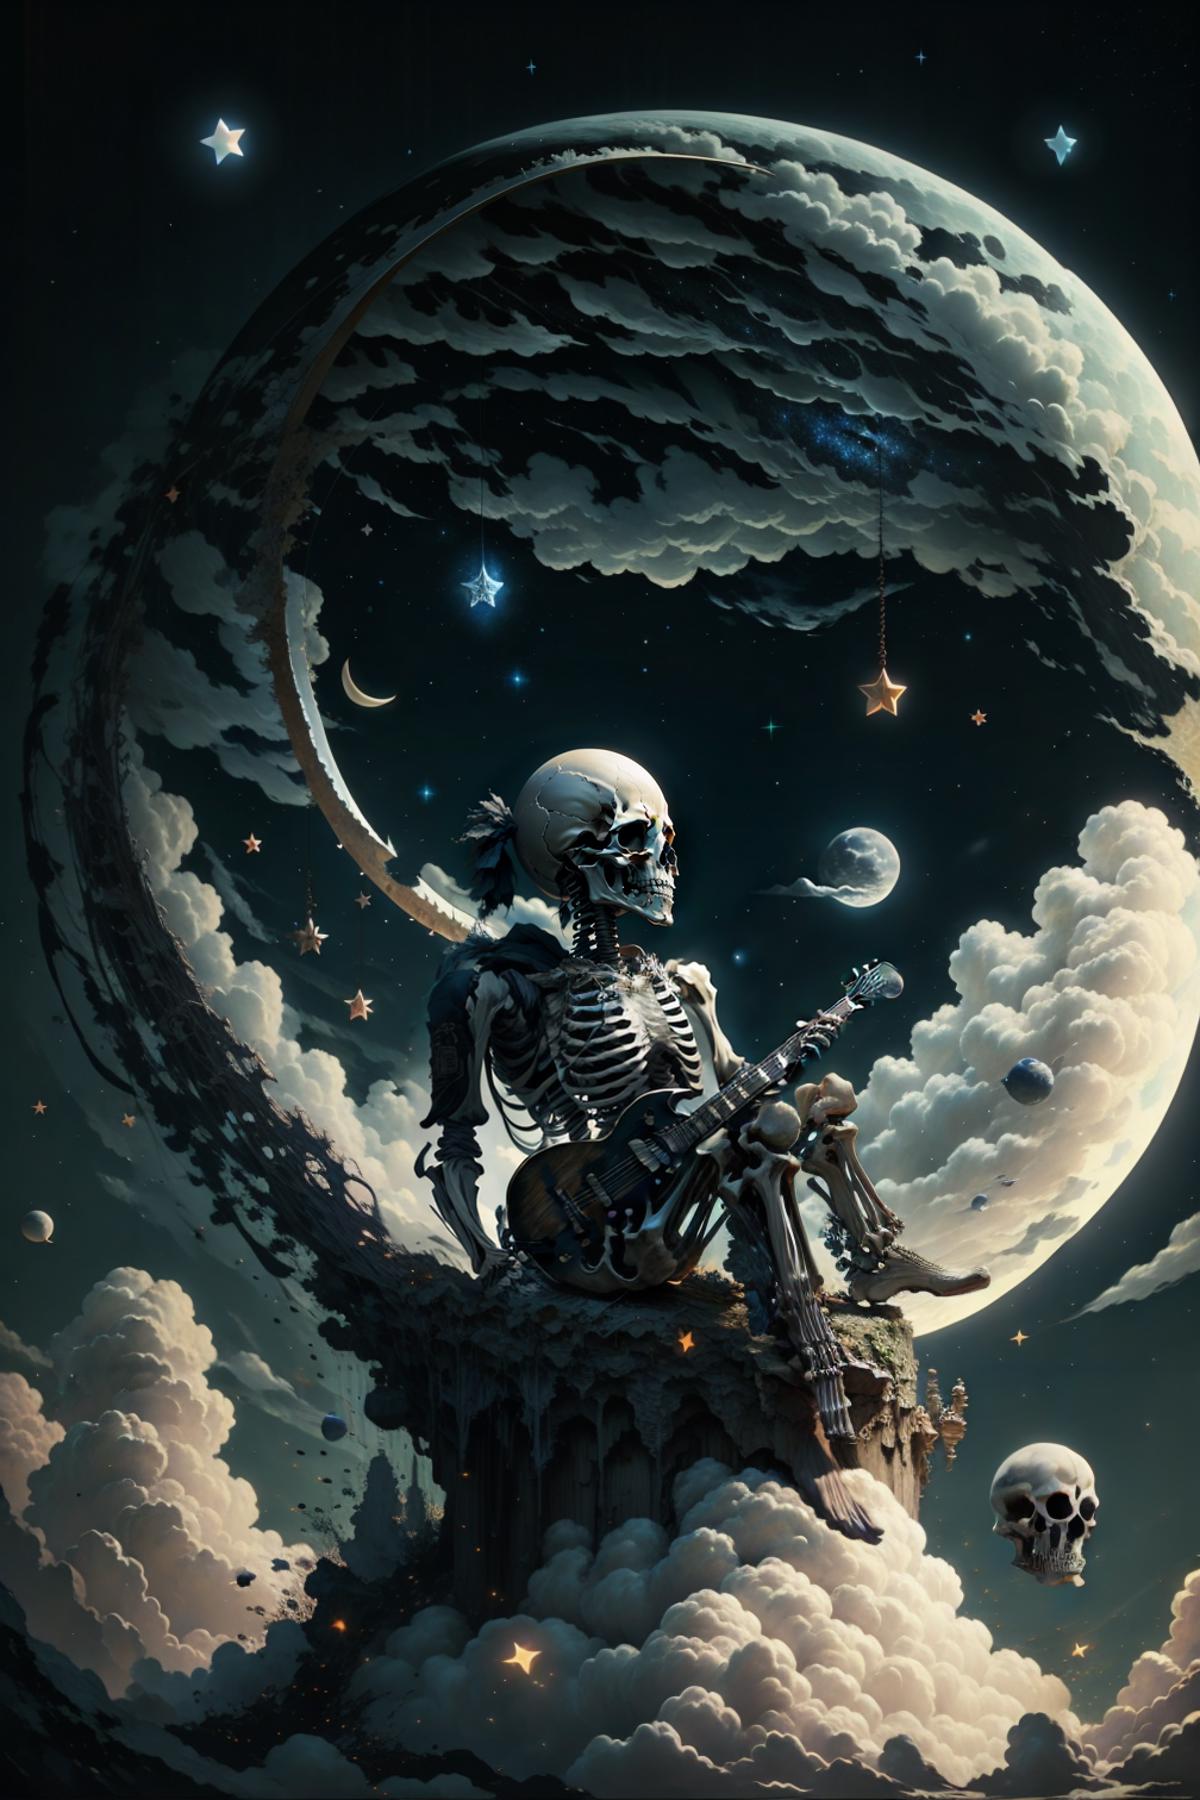 A skeleton playing a guitar in front of a moon and stars.